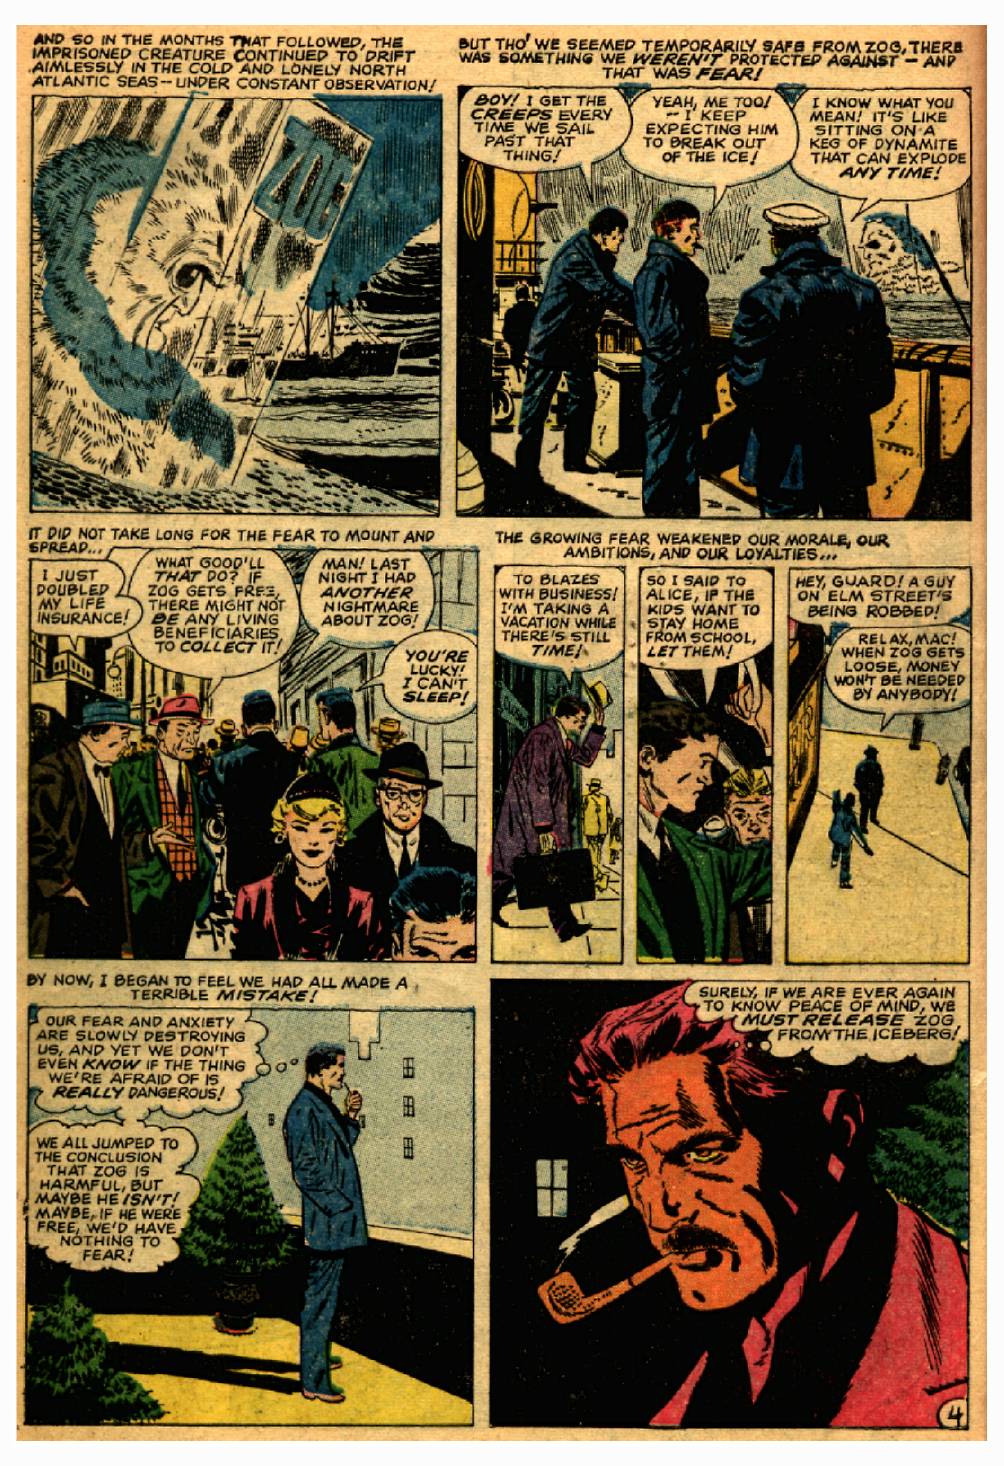 Journey Into Mystery (1952) 56 Page 4